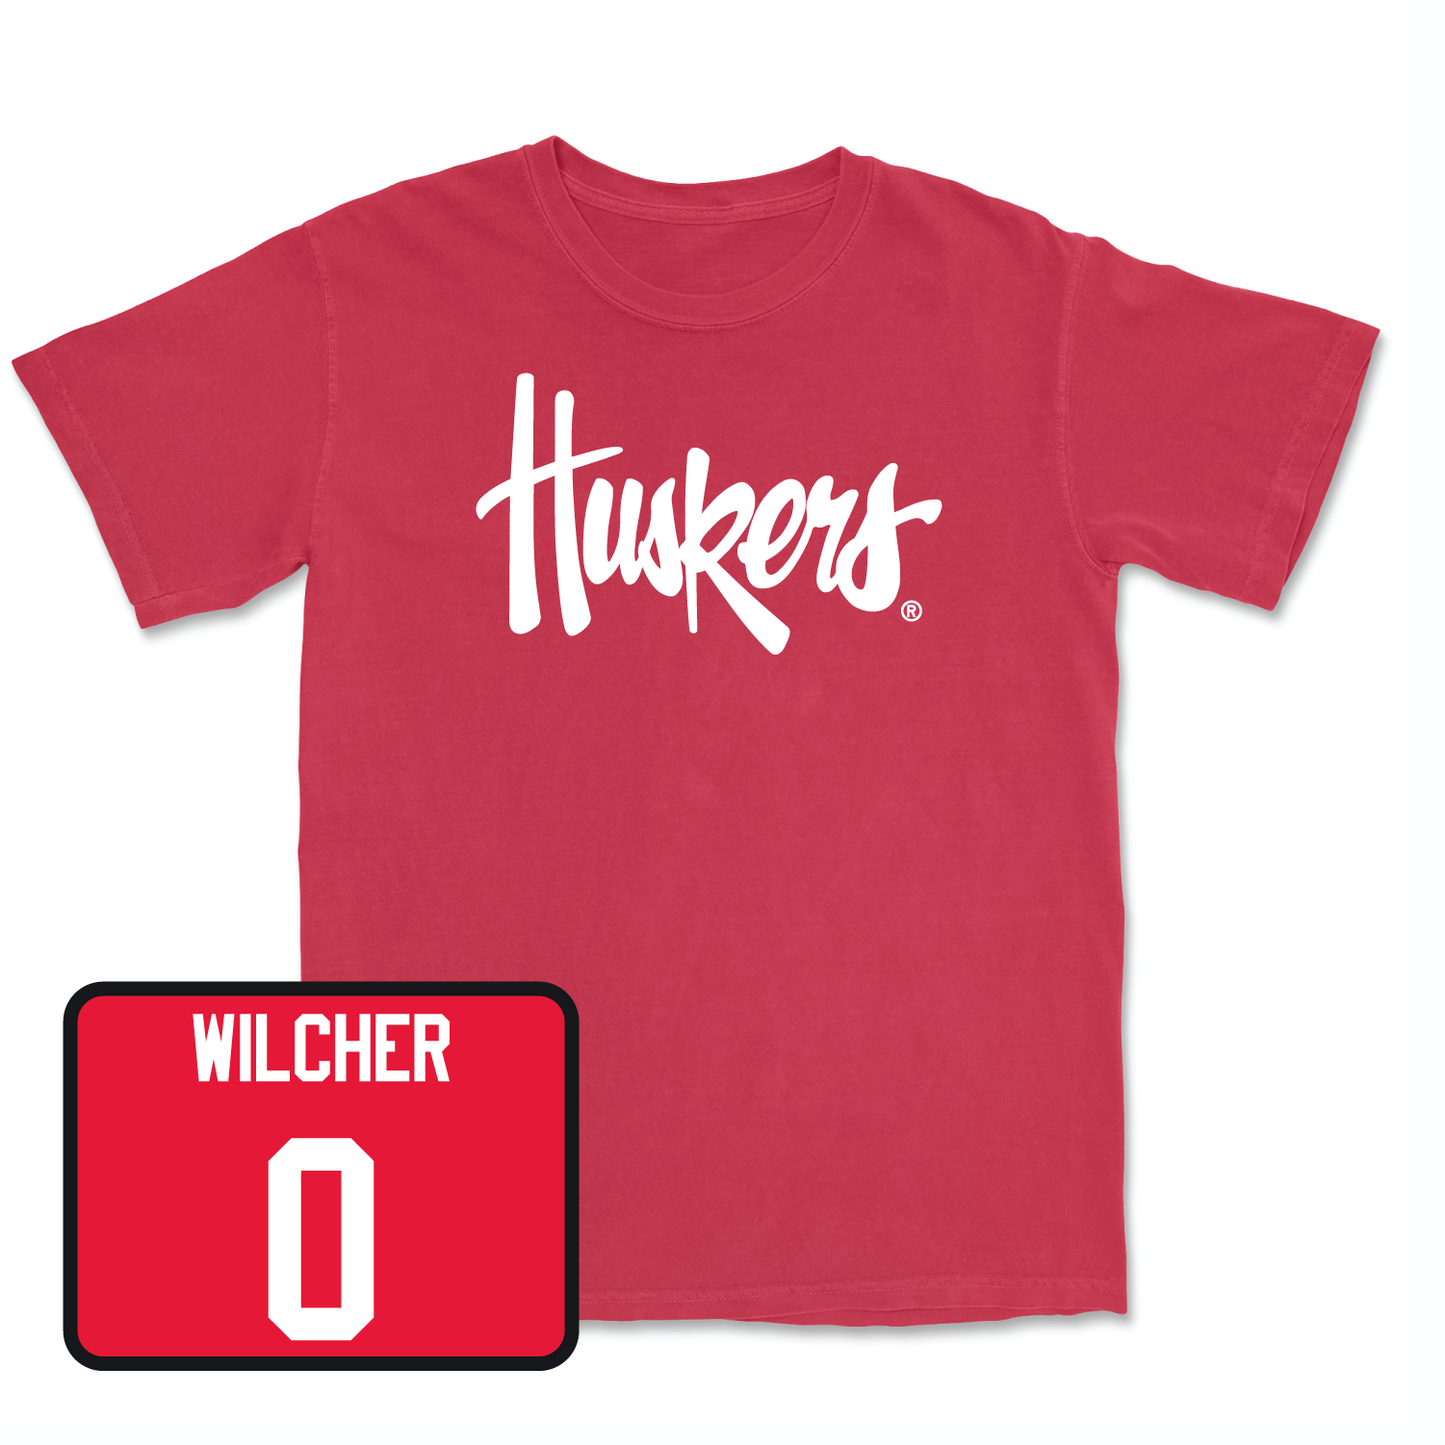 Red Men's Basketball Huskers Tee Youth Medium / C.J. Wilcher | #0